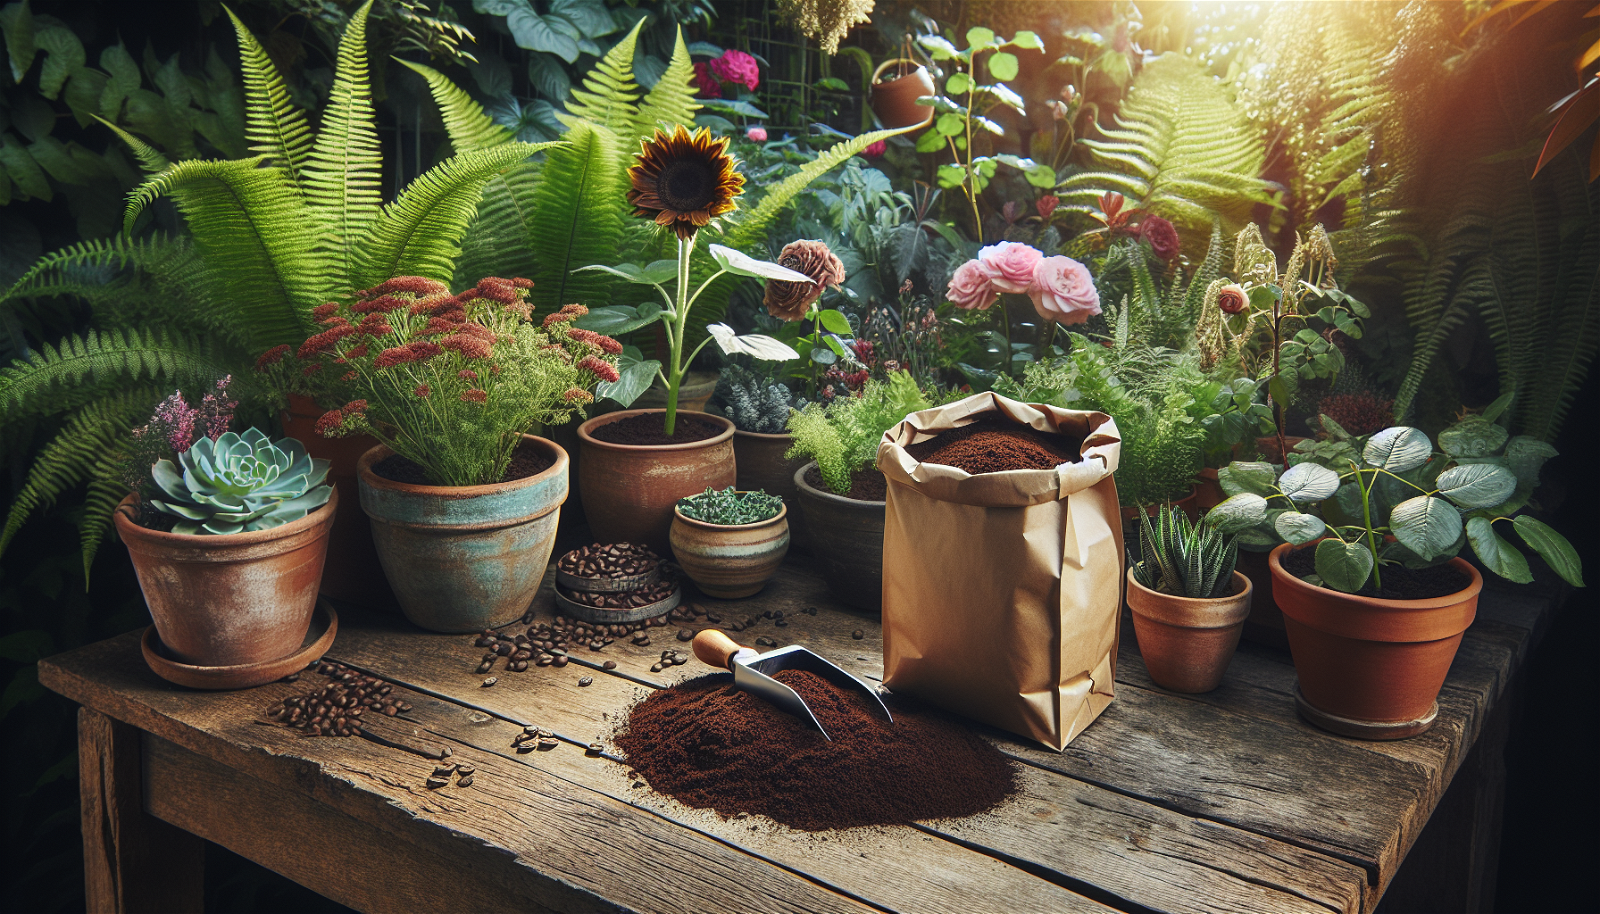 Coffee Grounds in the Garden: Friend or Foe for Your Plants?